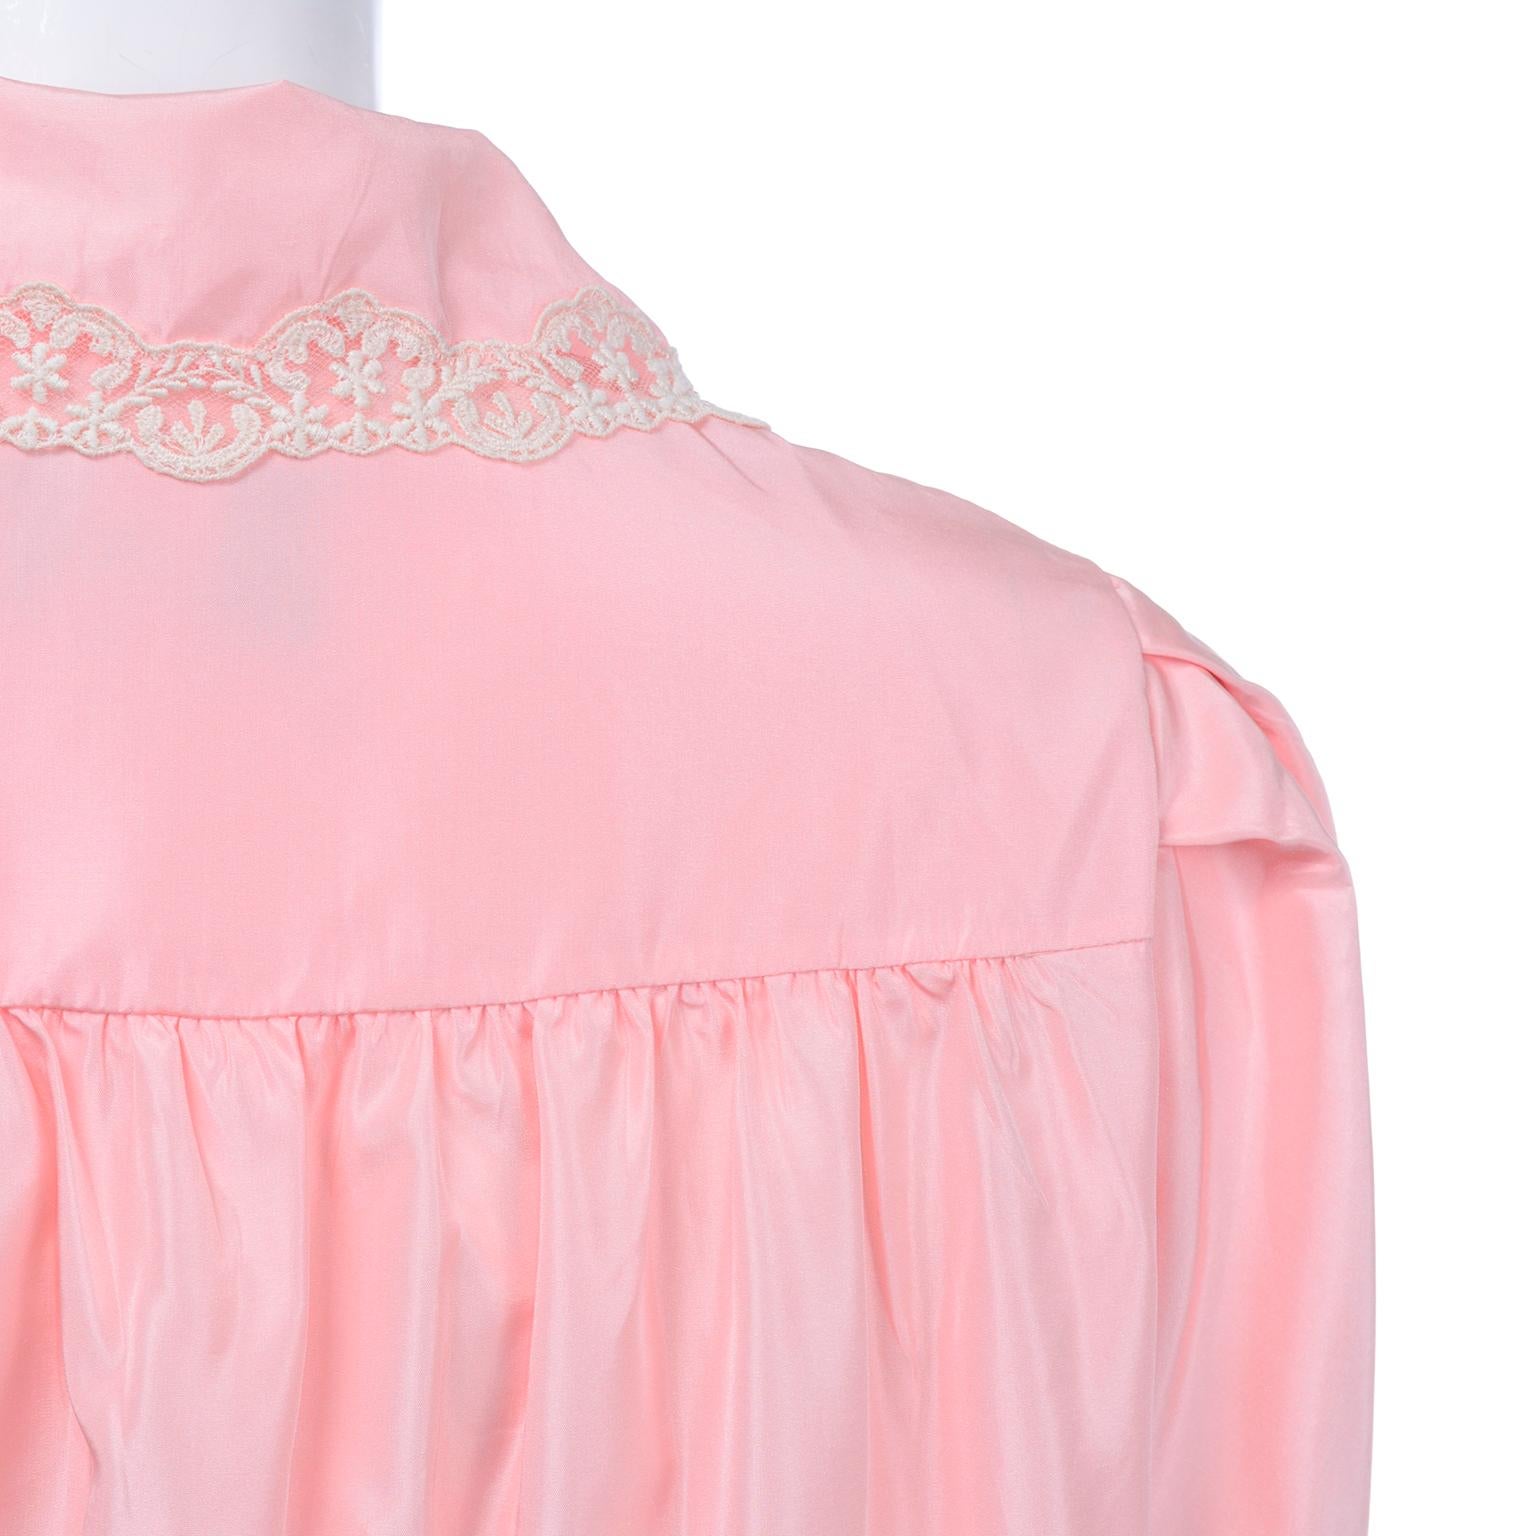 Chloe Vintage Button Front Pink Taffeta Robe With Lace Trim In Good Condition For Sale In Portland, OR